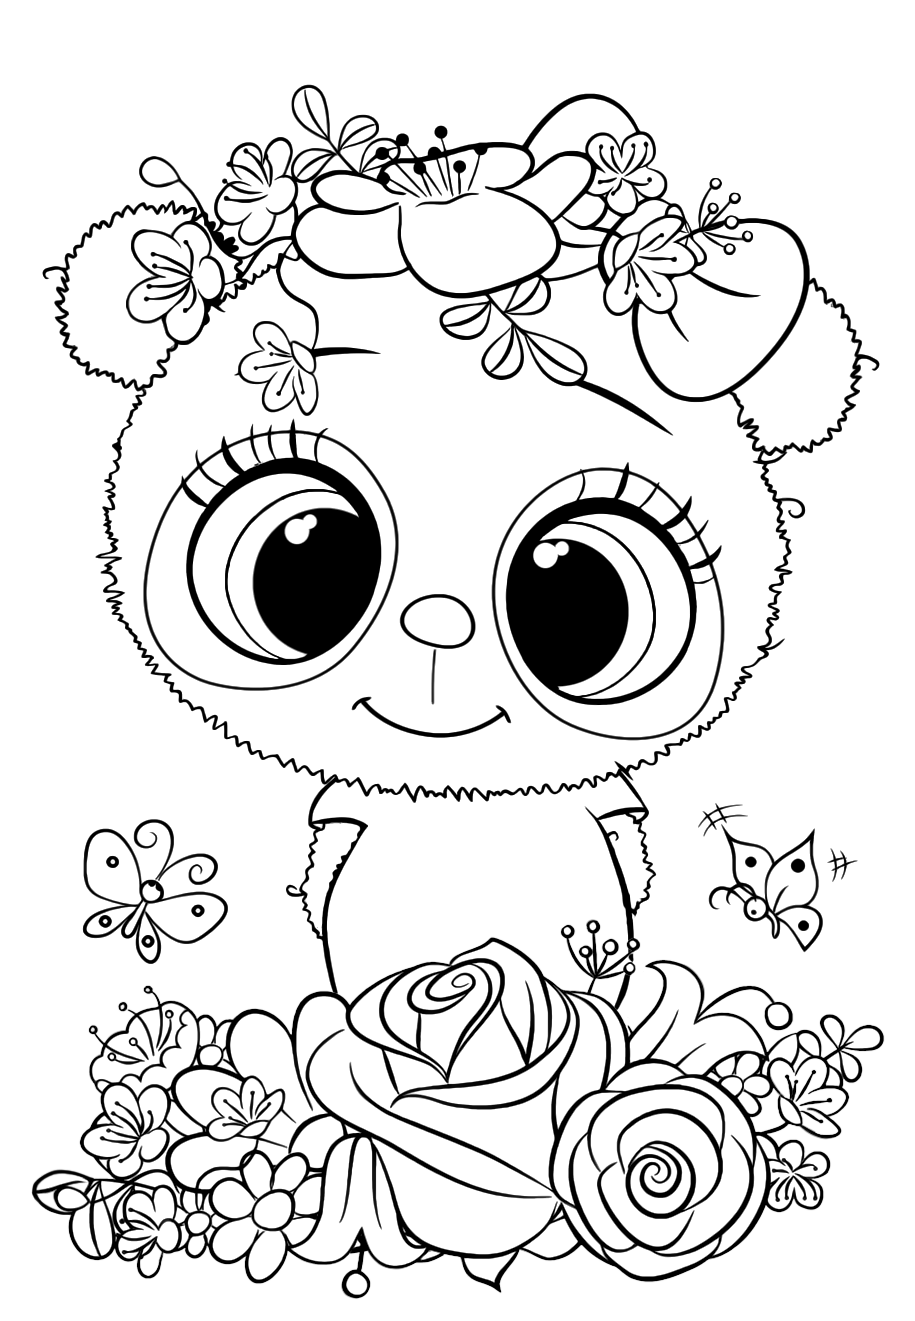 Cute Panda - Coloring pages for you